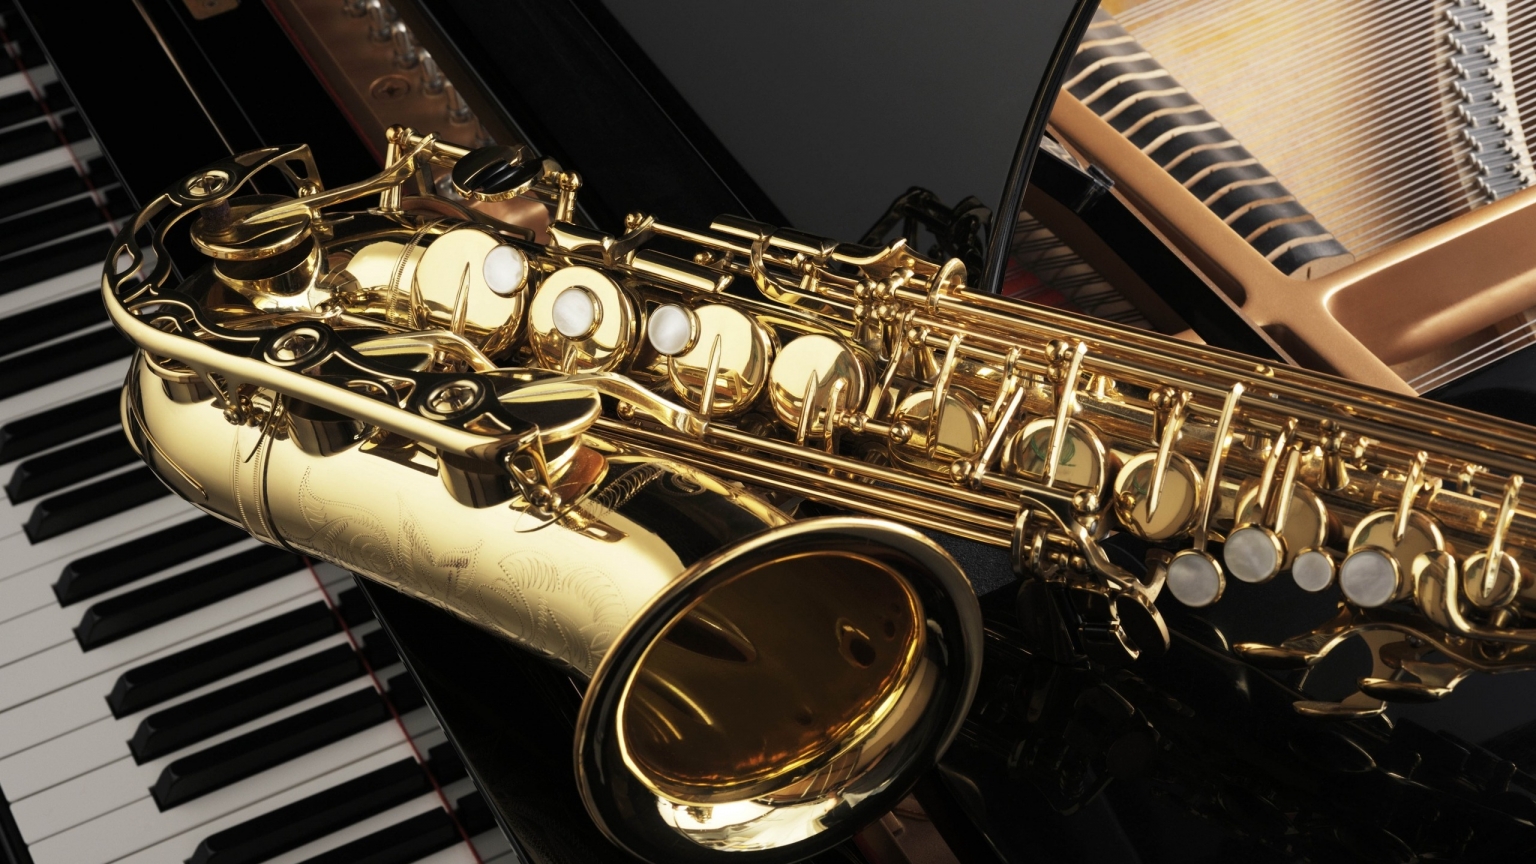 Saxophone and Piano for 1536 x 864 HDTV resolution